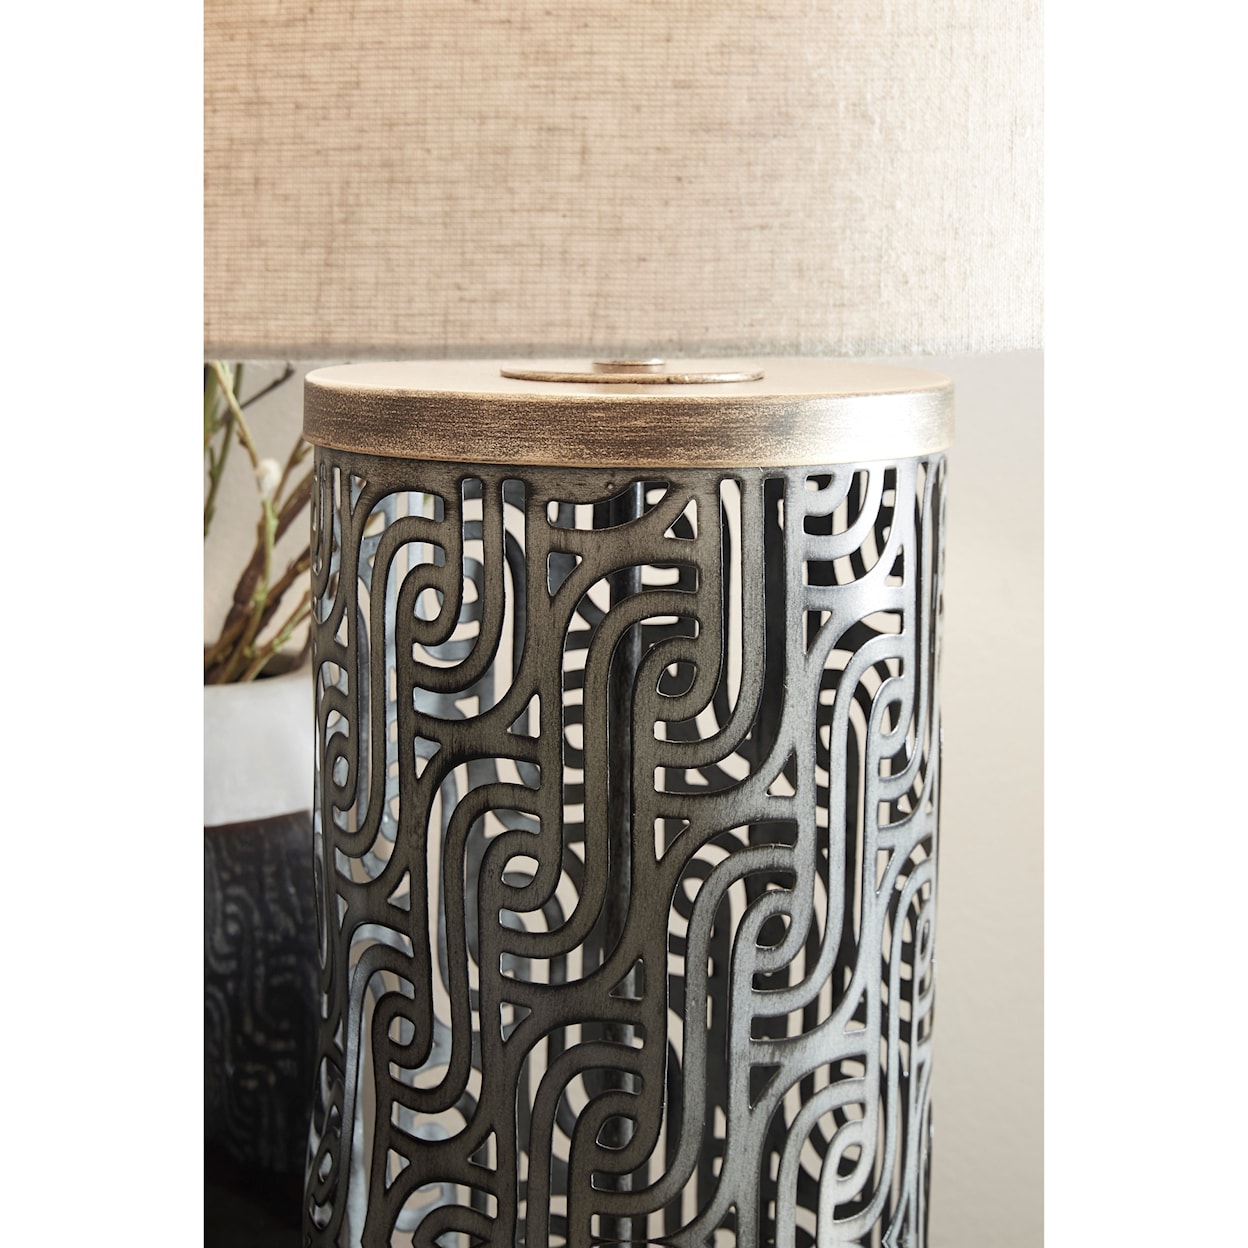 Ashley Furniture Signature Design Lamps - Contemporary Dayo Gray/Gold Metal Table Lamp